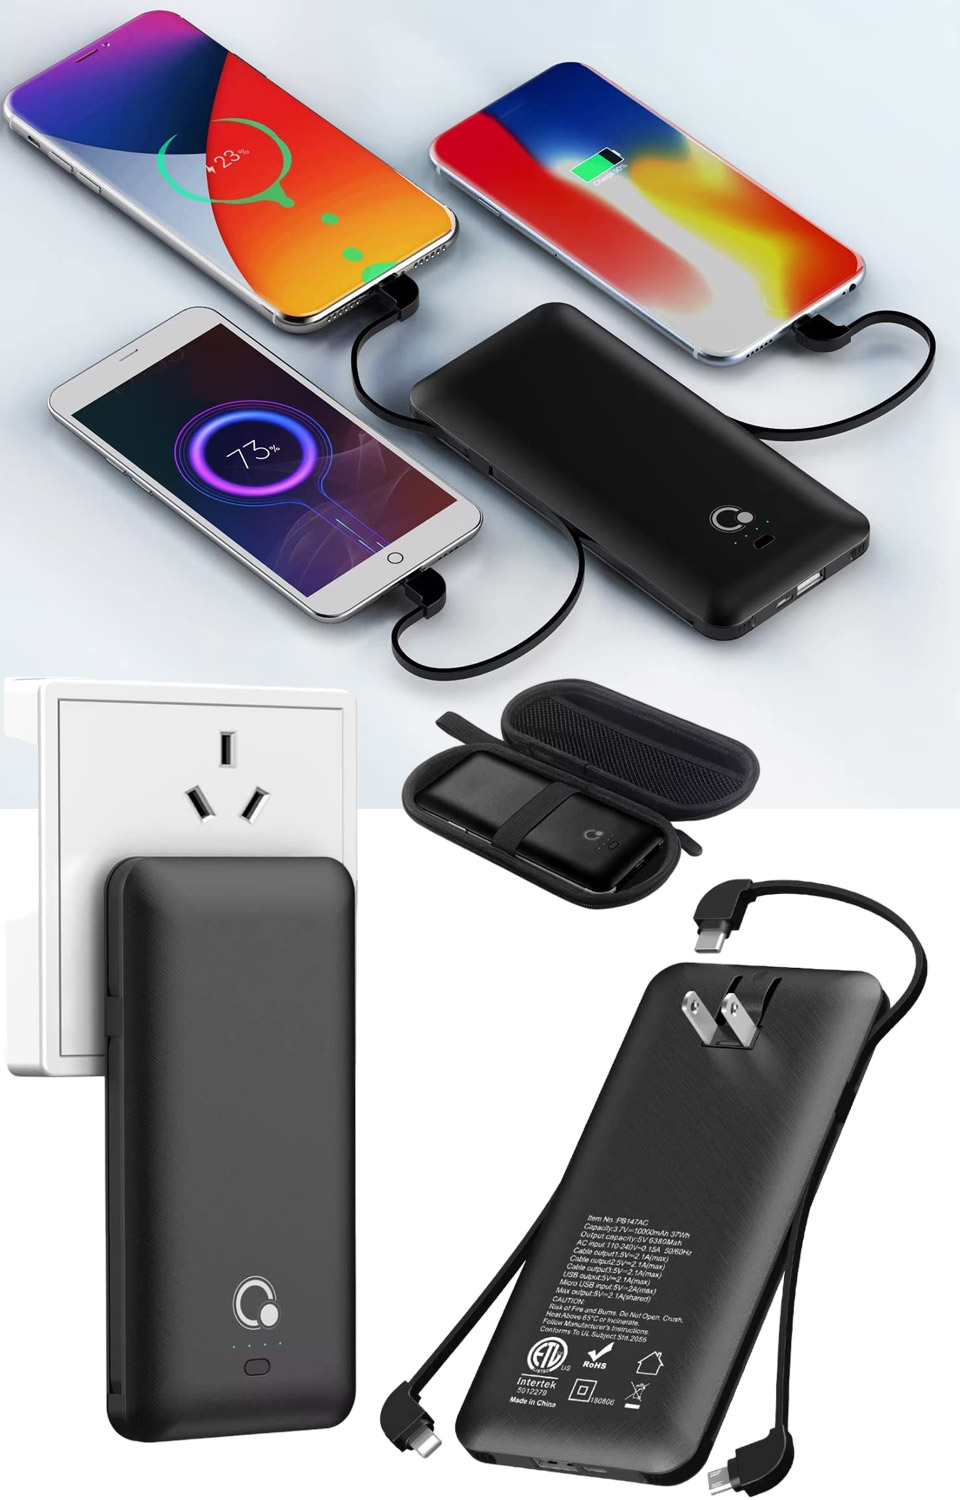 Brand Q Portable Power Bank With Built-in AC Wall Plug